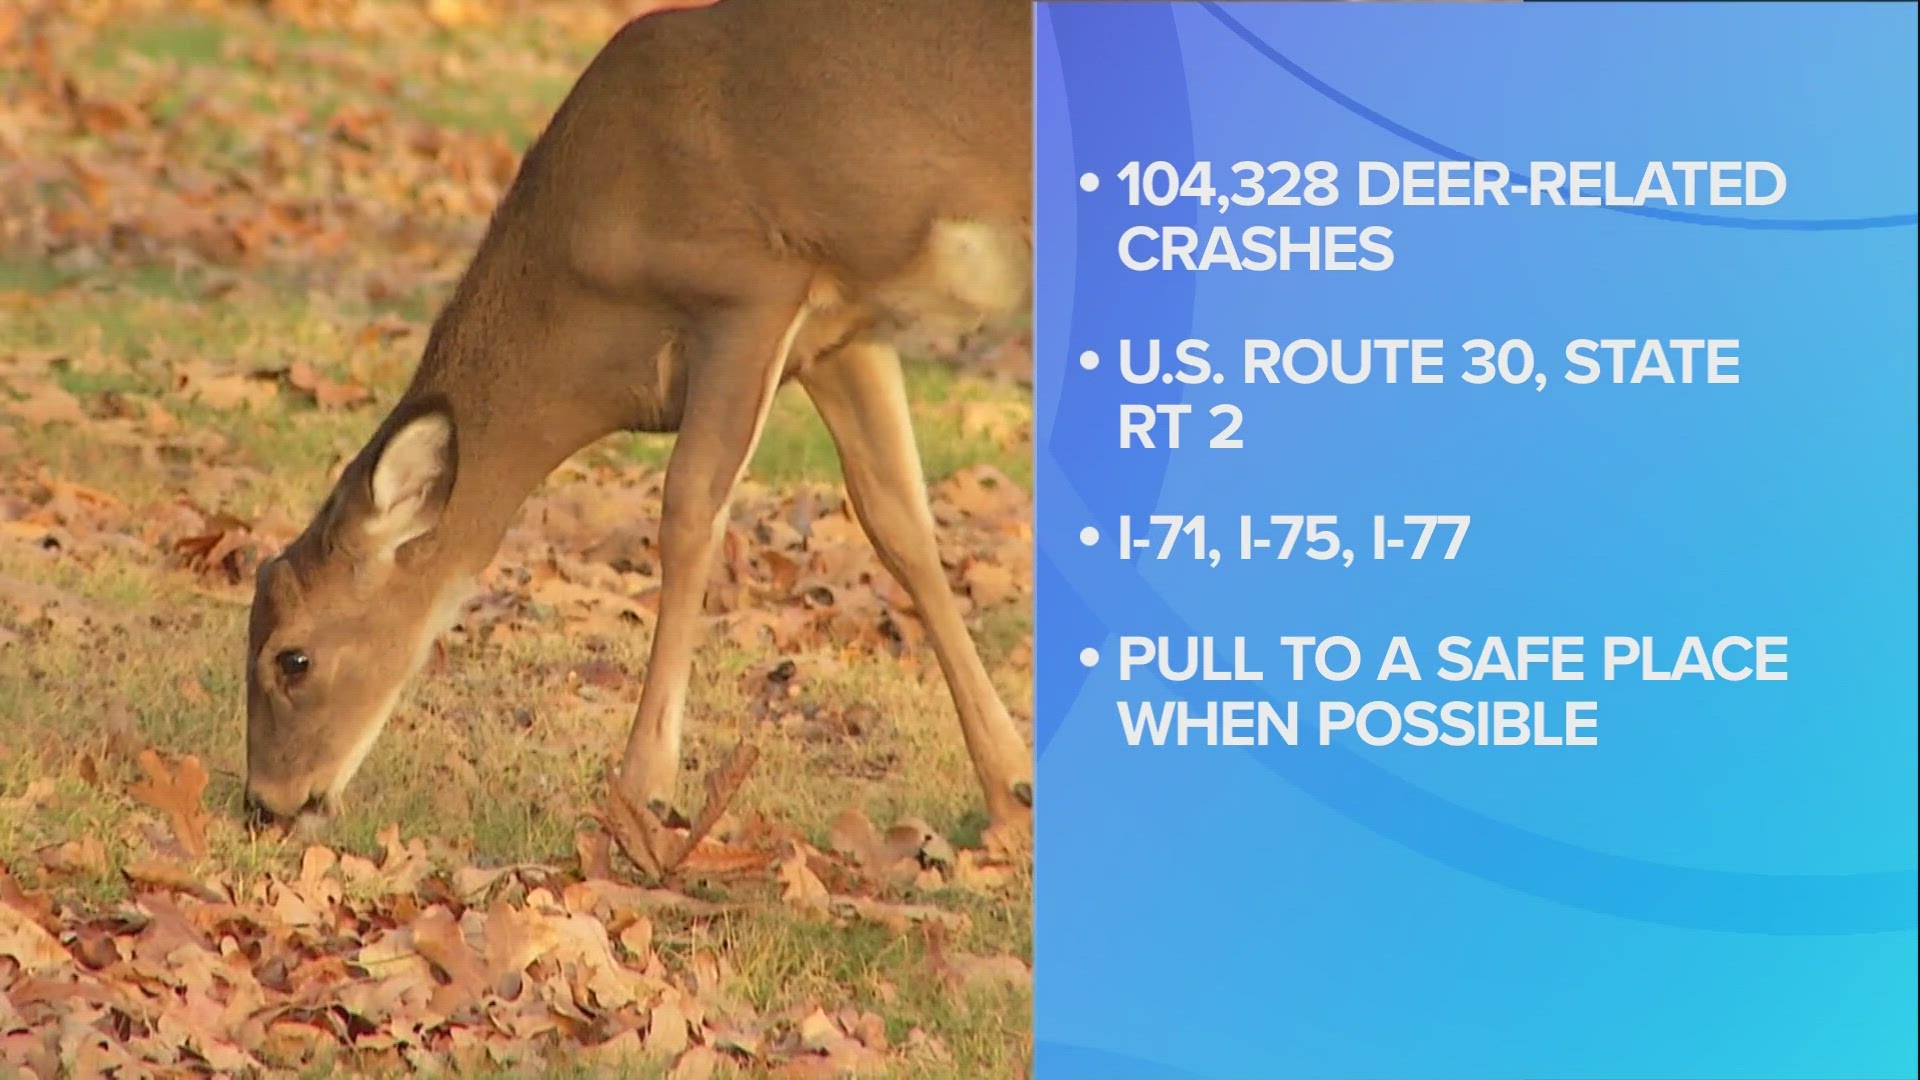 Data from the Ohio State Highway Patrol shows that since 2018, there have been 104,328 deer-related crashes.